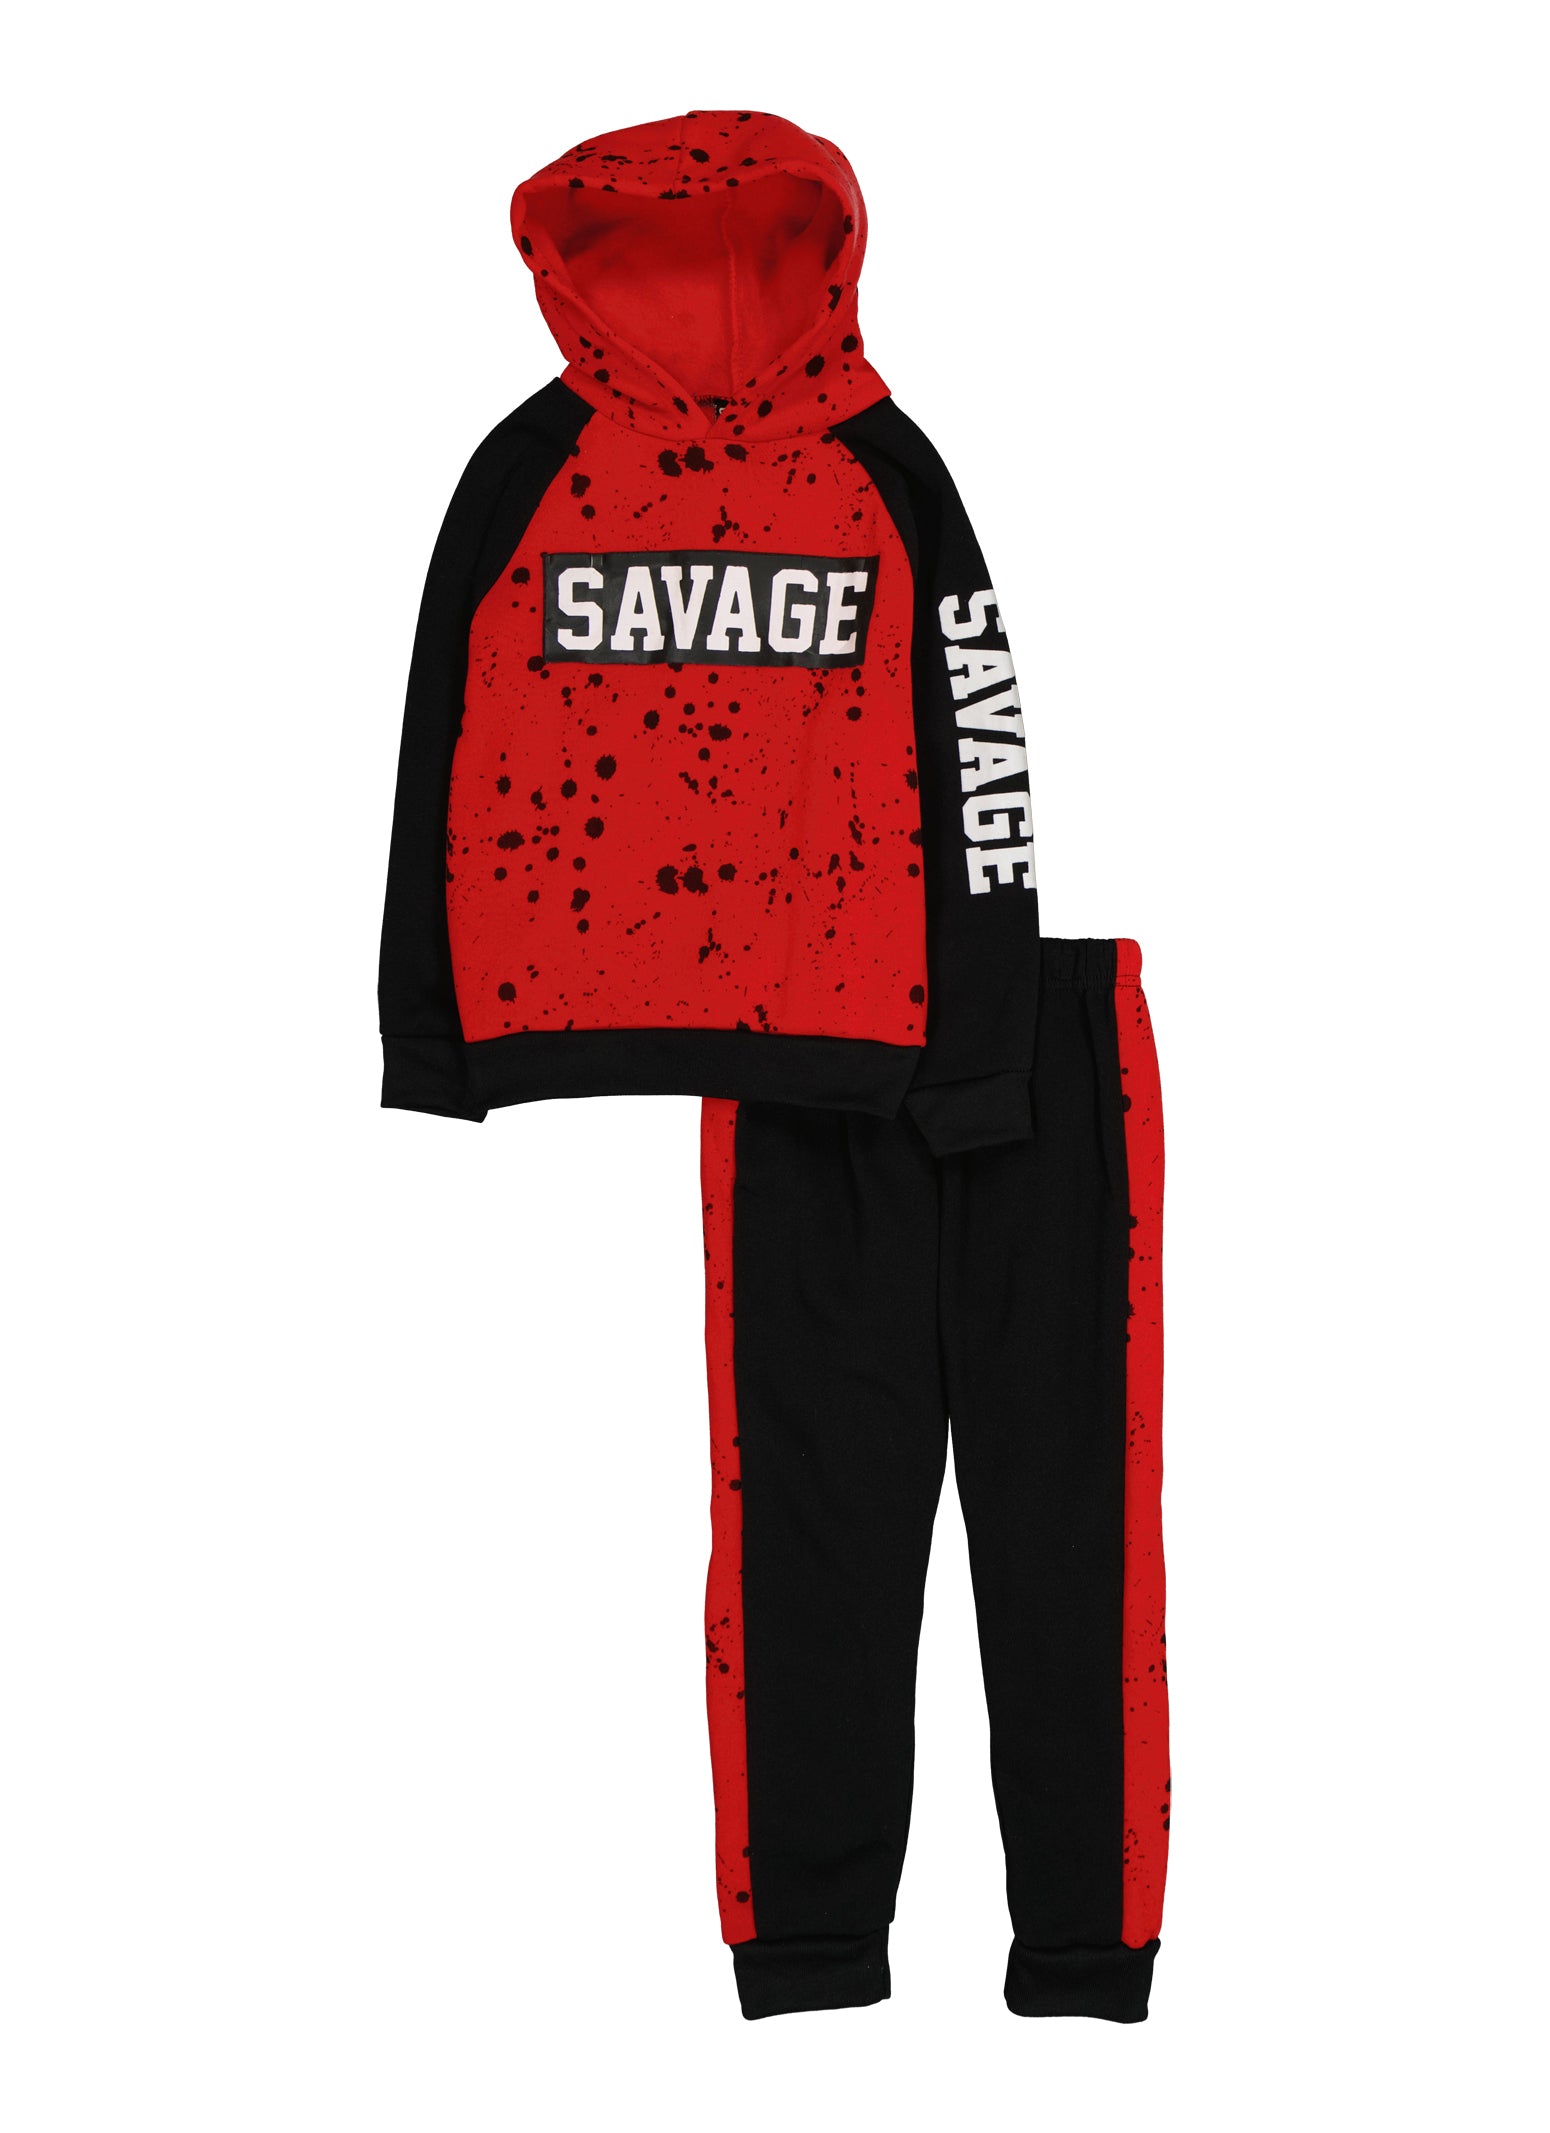 Little Boys Savage Paint Splatter Hoodie and Joggers, Red, Size 7